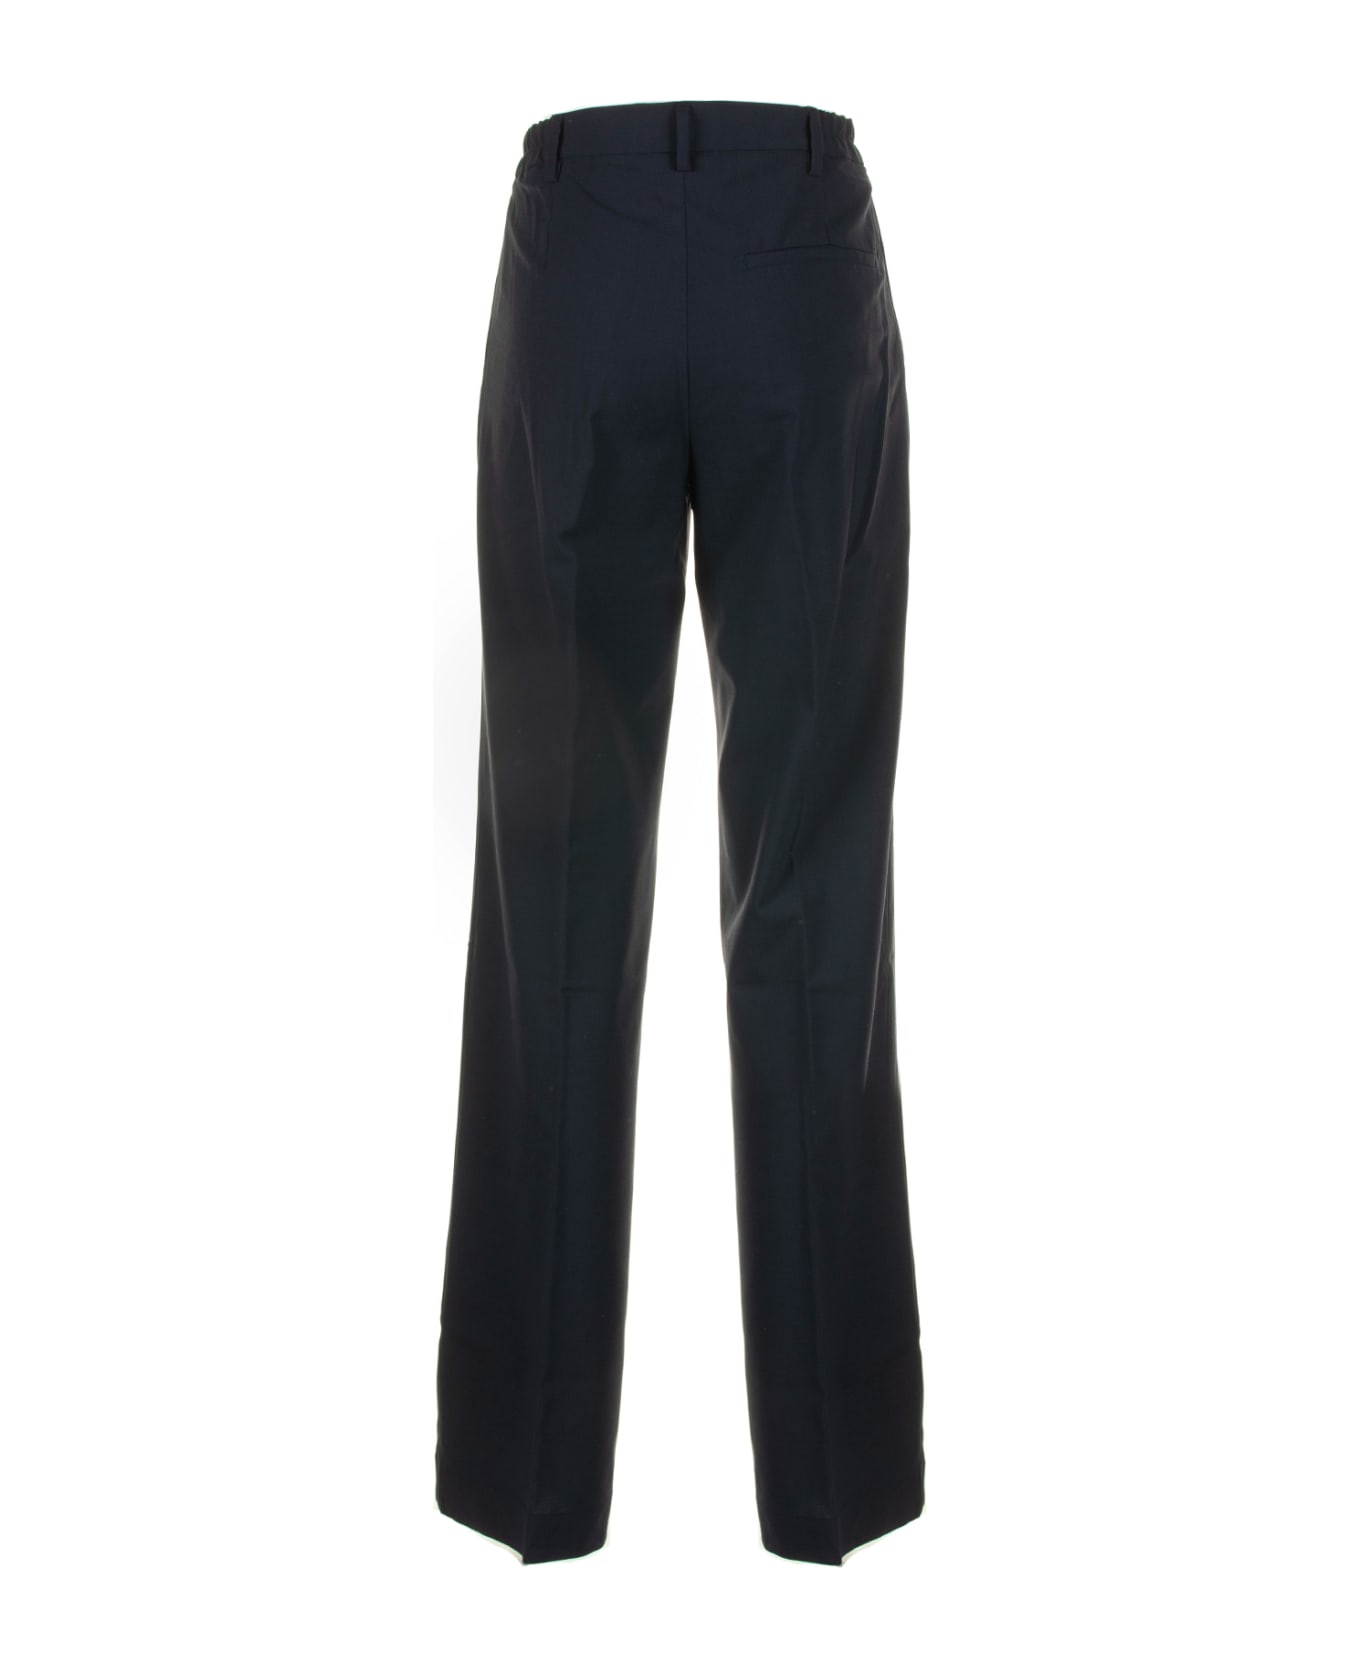 Myths Navy Blue High-waisted Trousers - BLU NAVY ボトムス